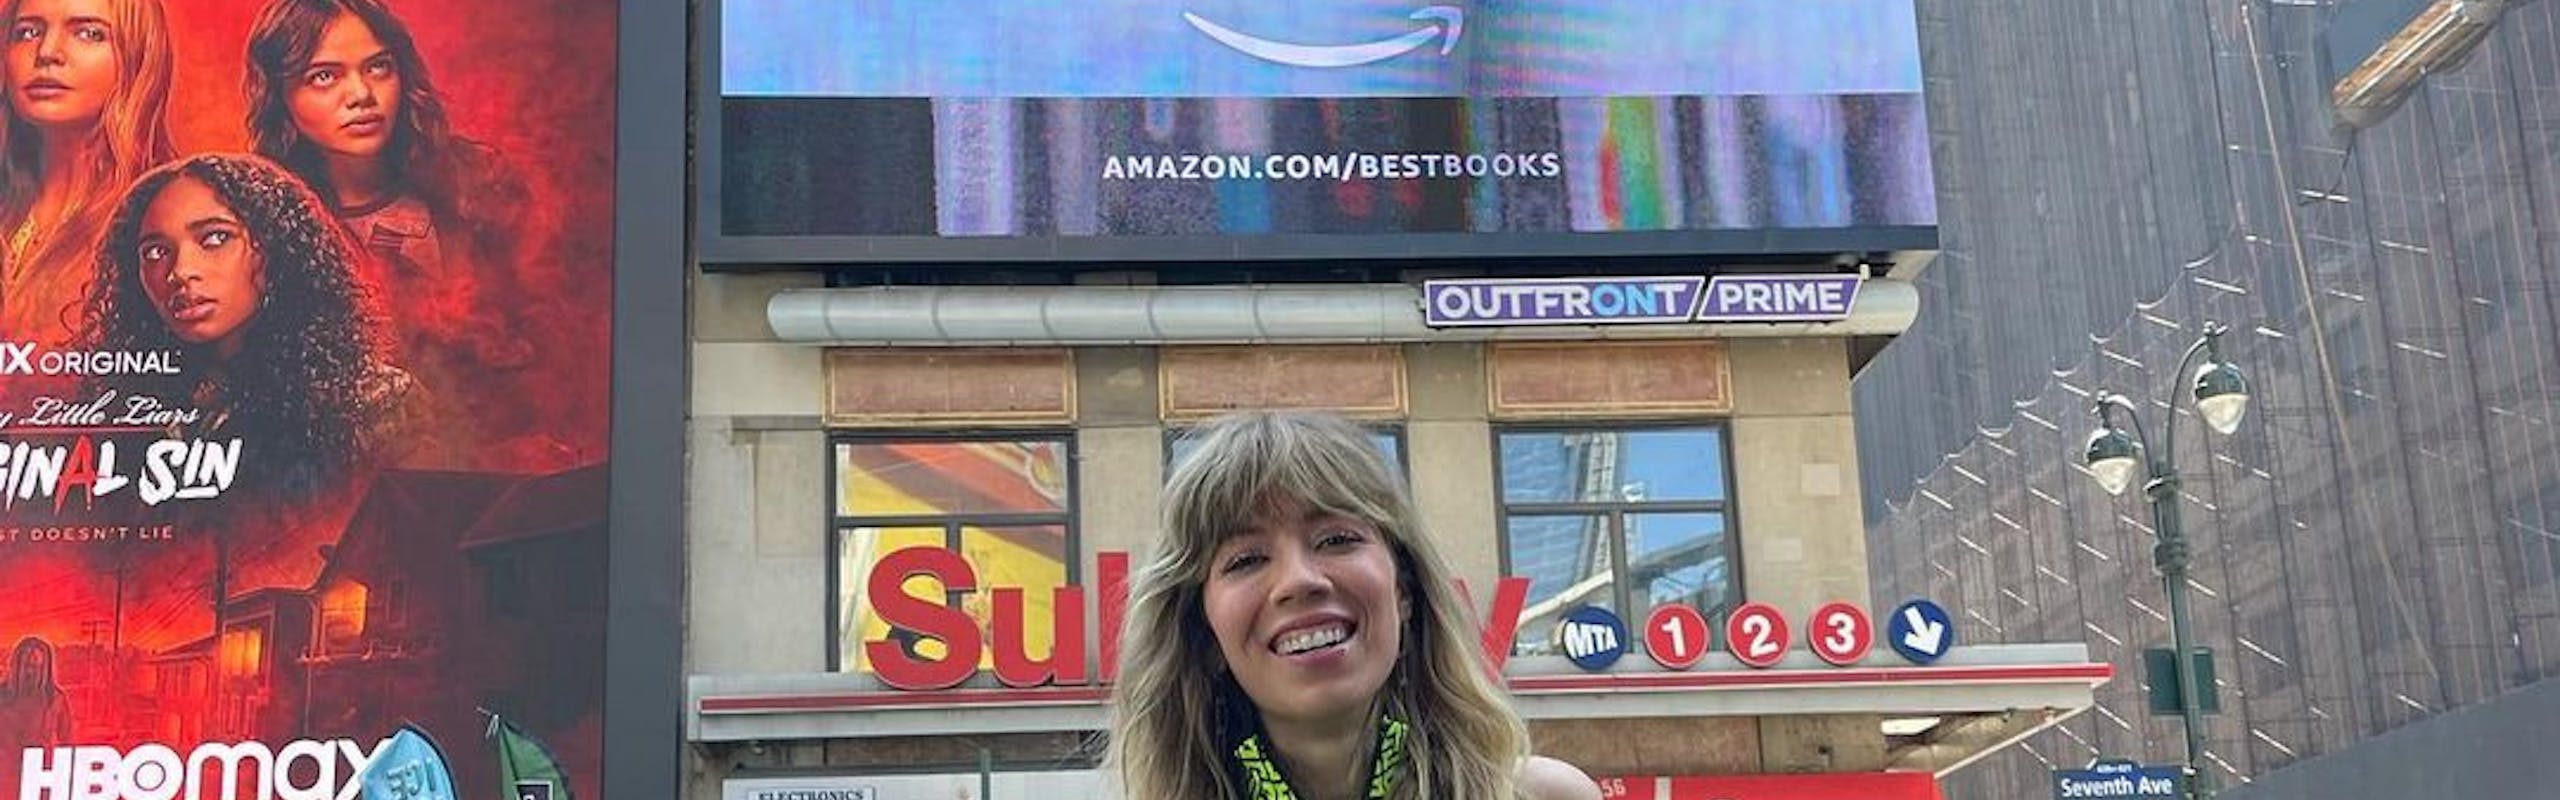 Jennette McCurdy standing under a billboard of her memoir “I’m Glad My Mom Died.”